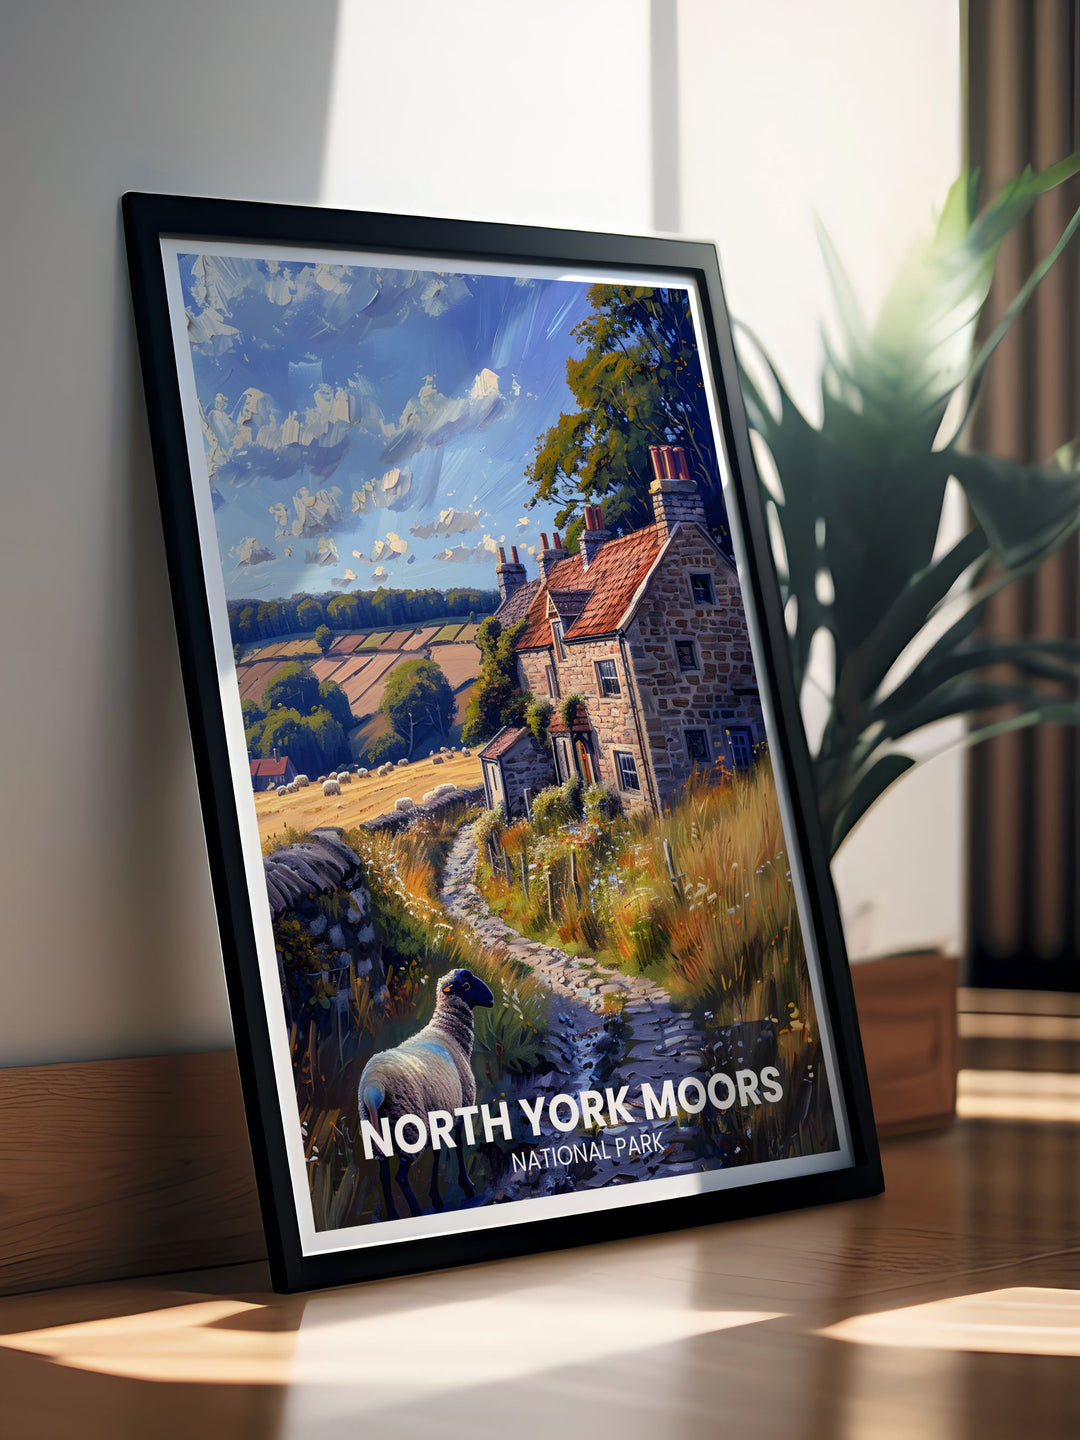 This art print beautifully depicts Goathland Village in North Yorkshire, capturing the timeless charm of its historic buildings and tranquil countryside, ideal for those who love scenic and cultural art.